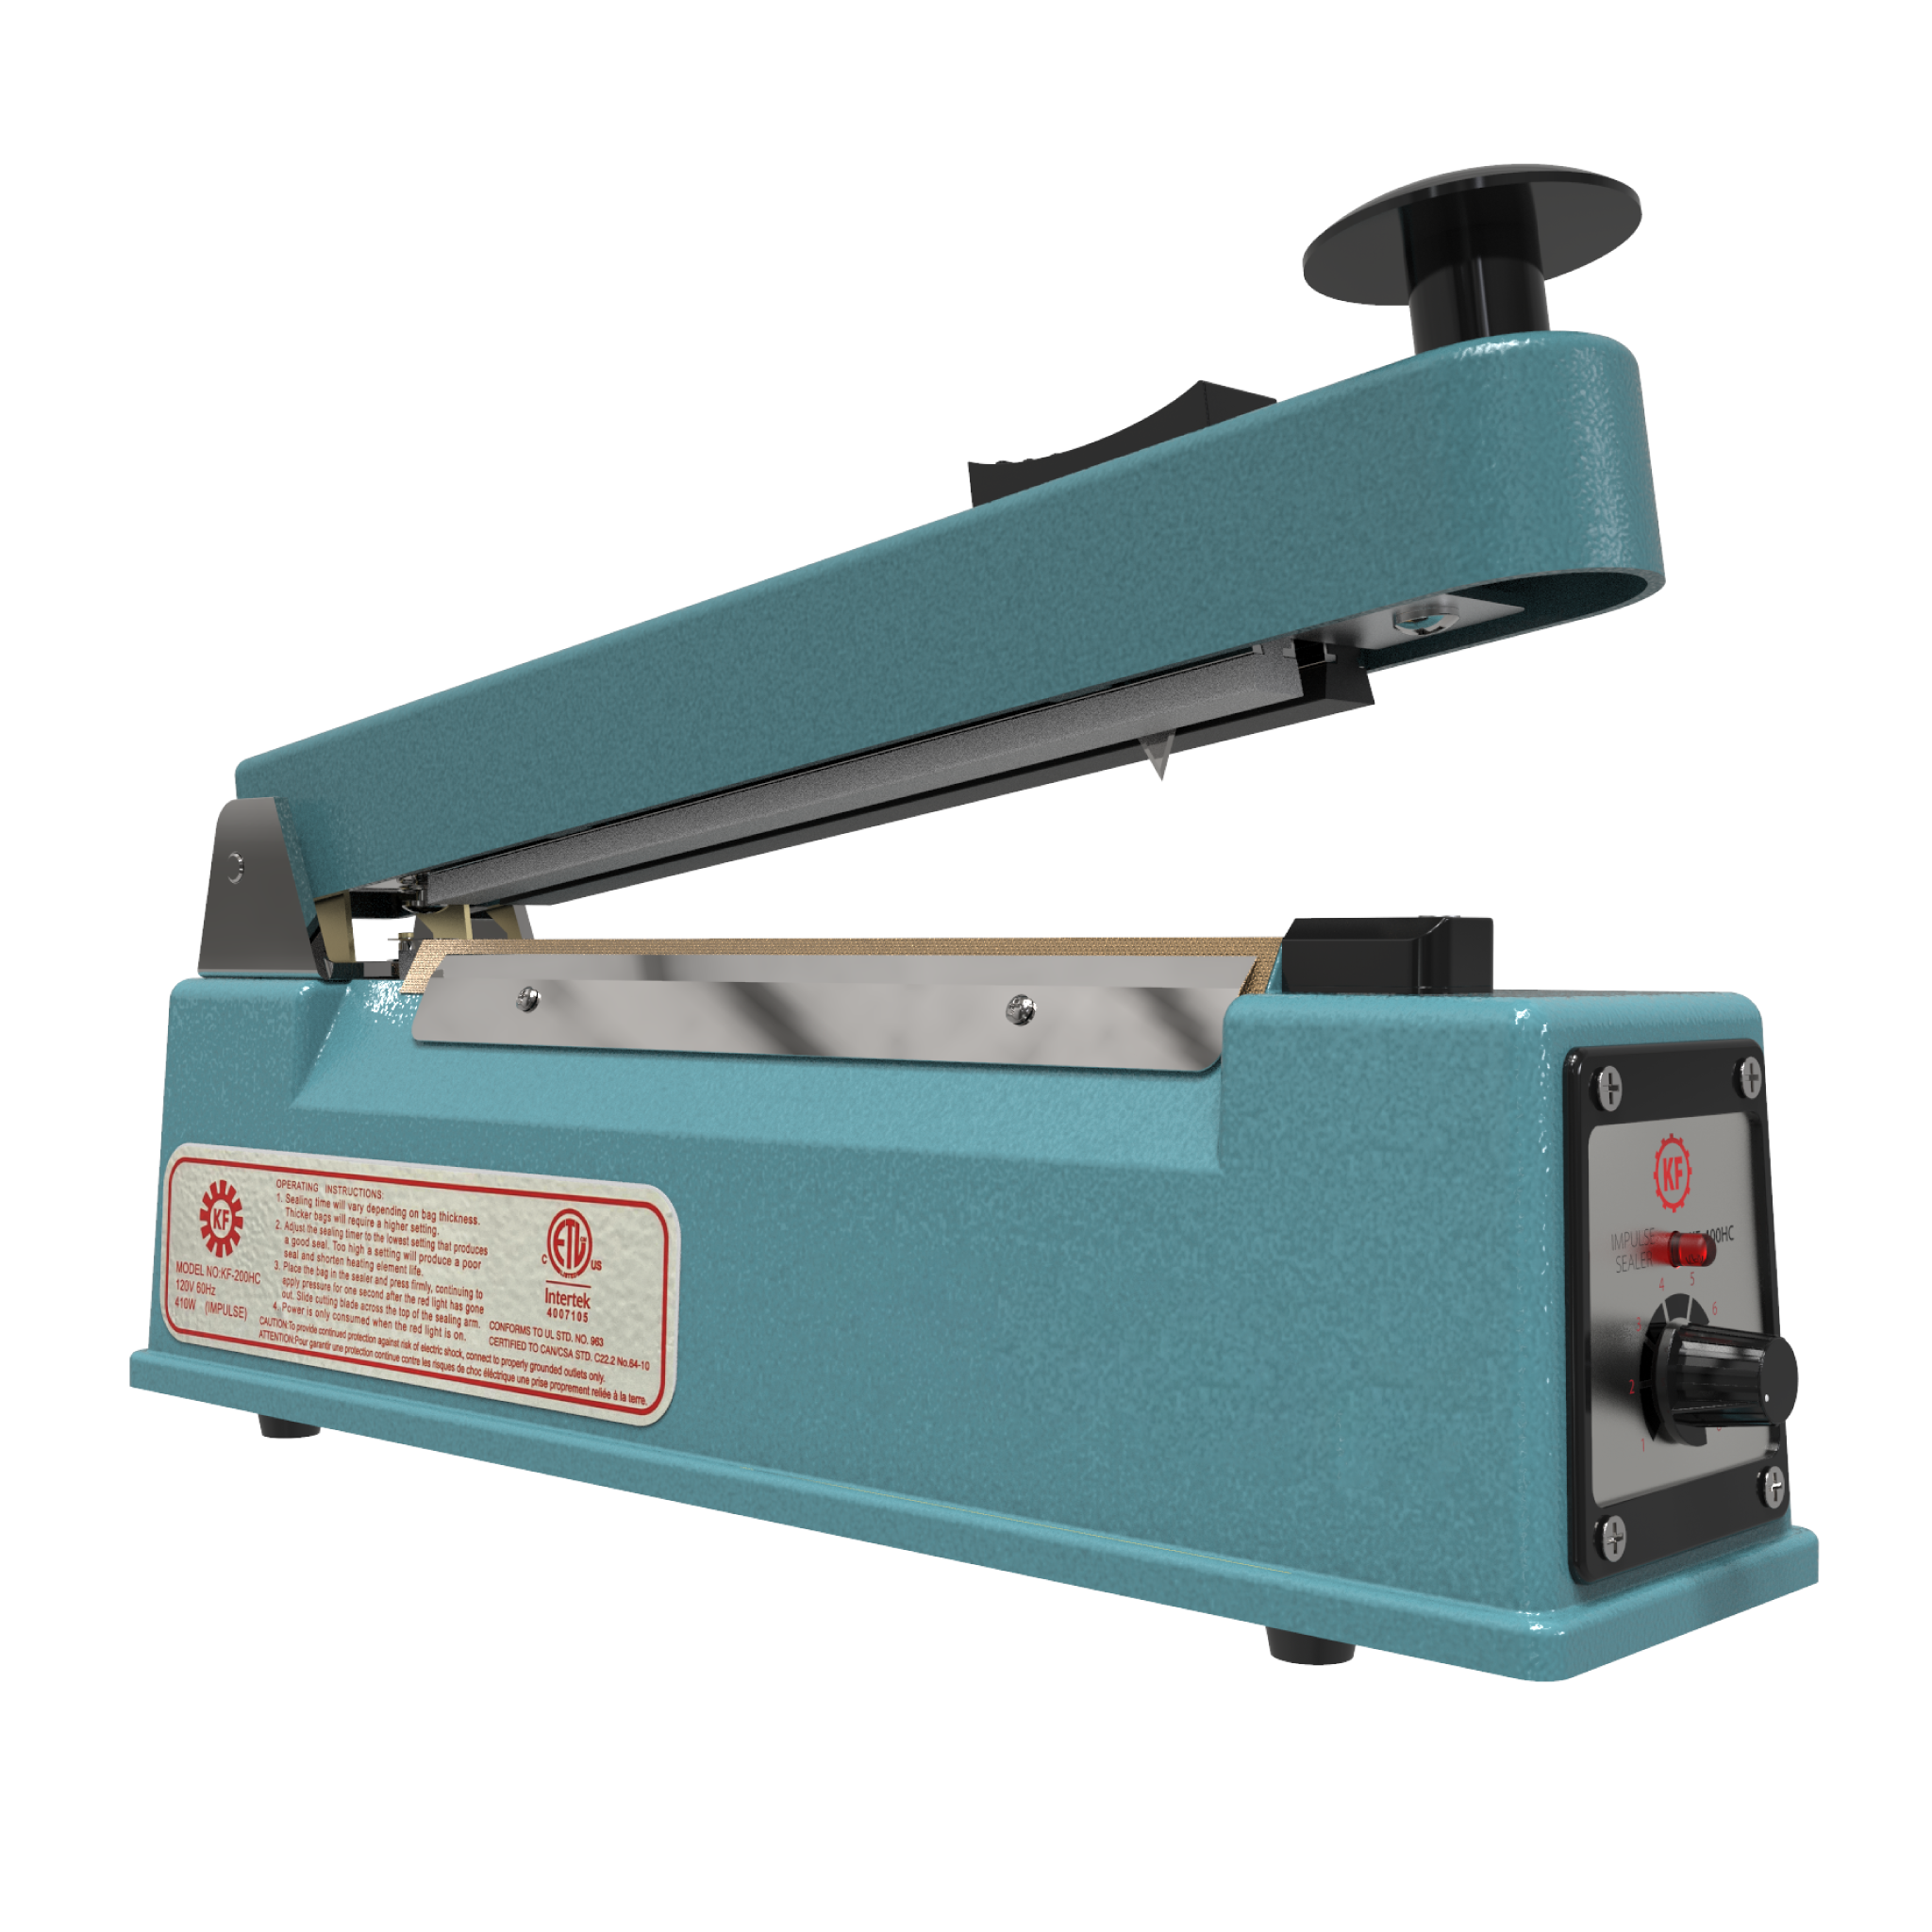 Compact Heating Sealer for Sealing Pouch Cell Laminated Aluminum Case-  MSK-140